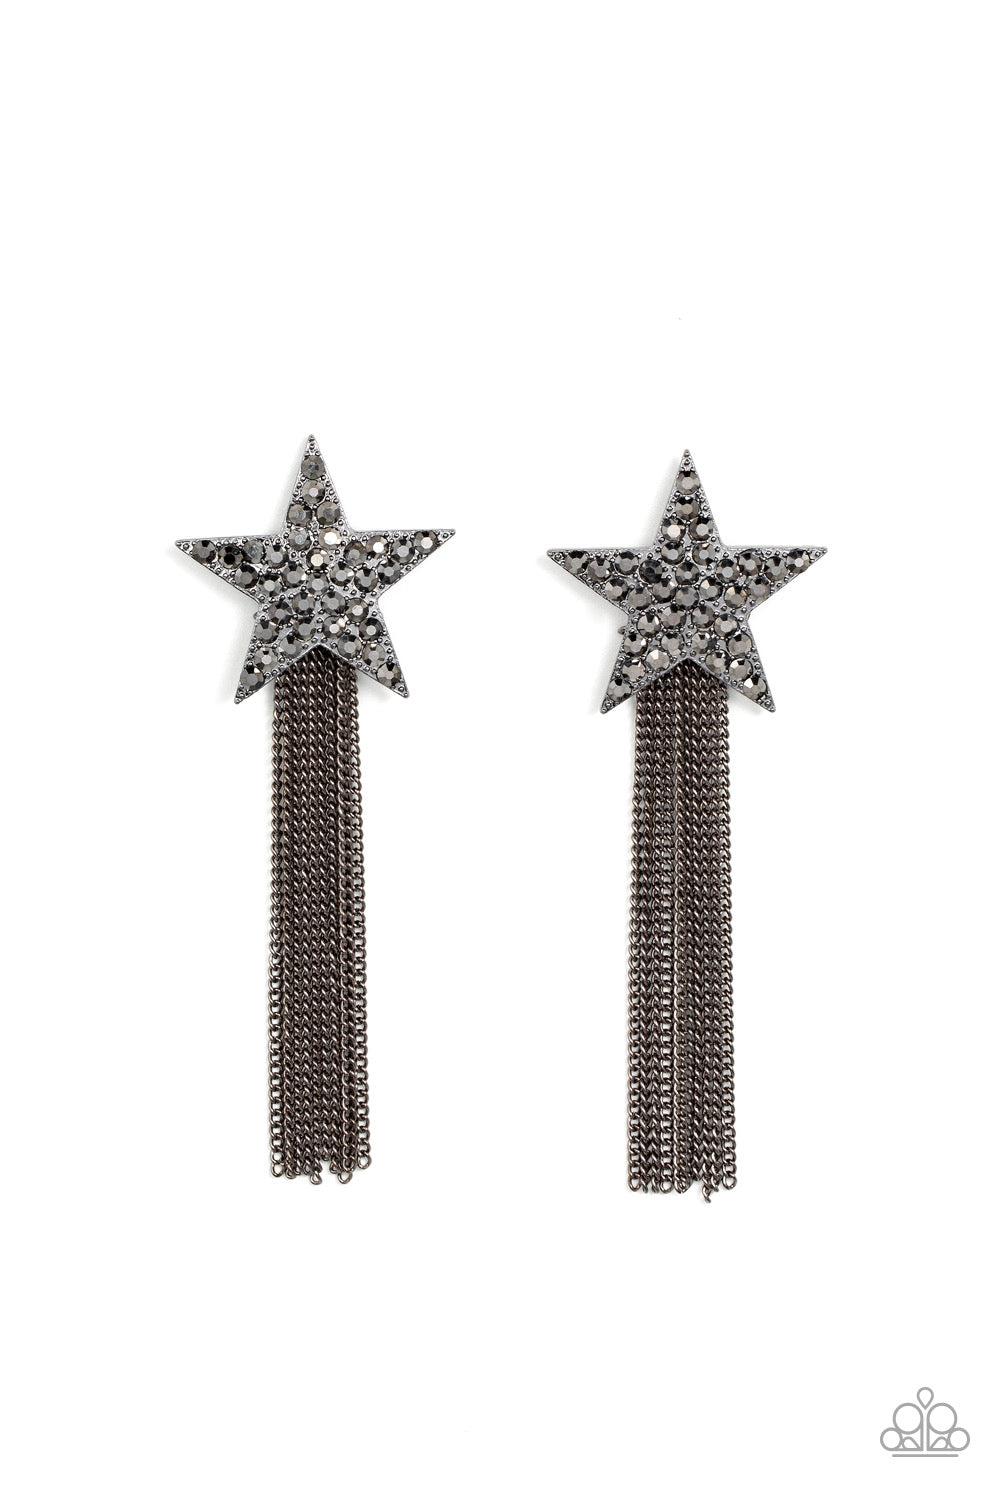 Paparazzi Superstar Solo - Black Earrings -Paparazzi Jewelry Images